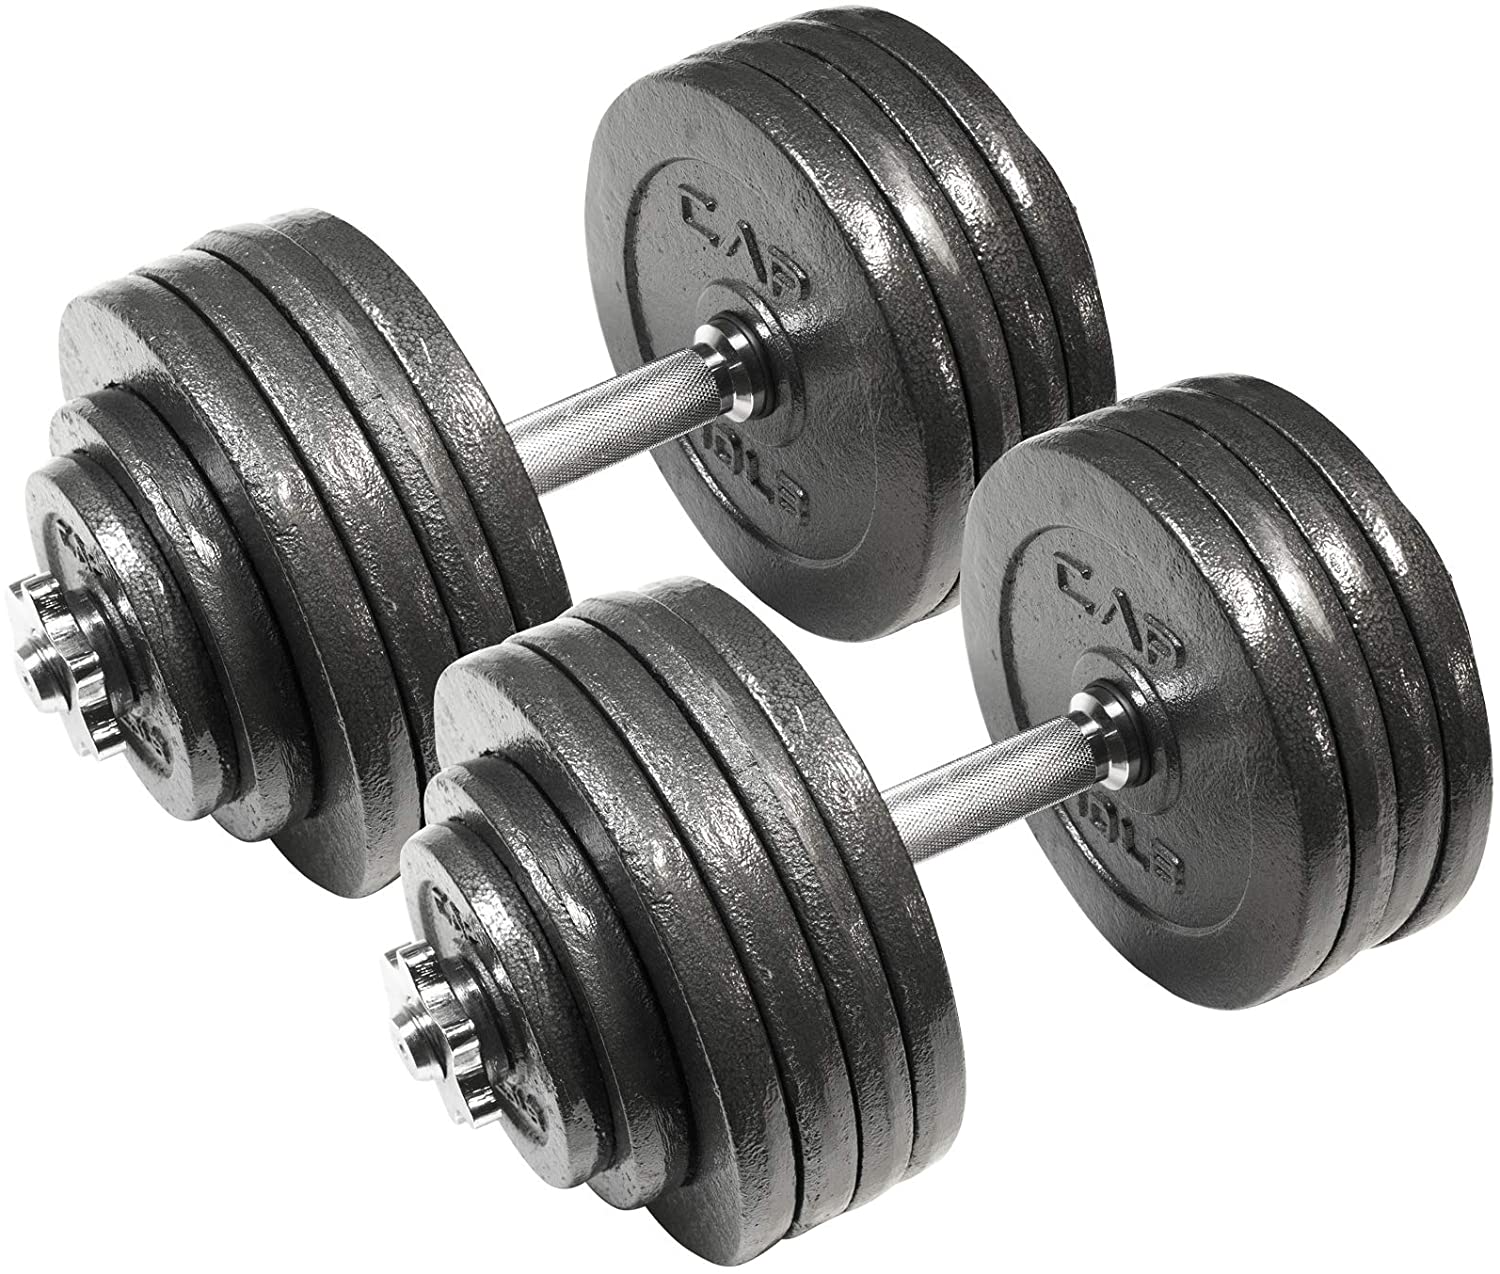 CAP Barbell 40lbs Adjustable Dumbbell